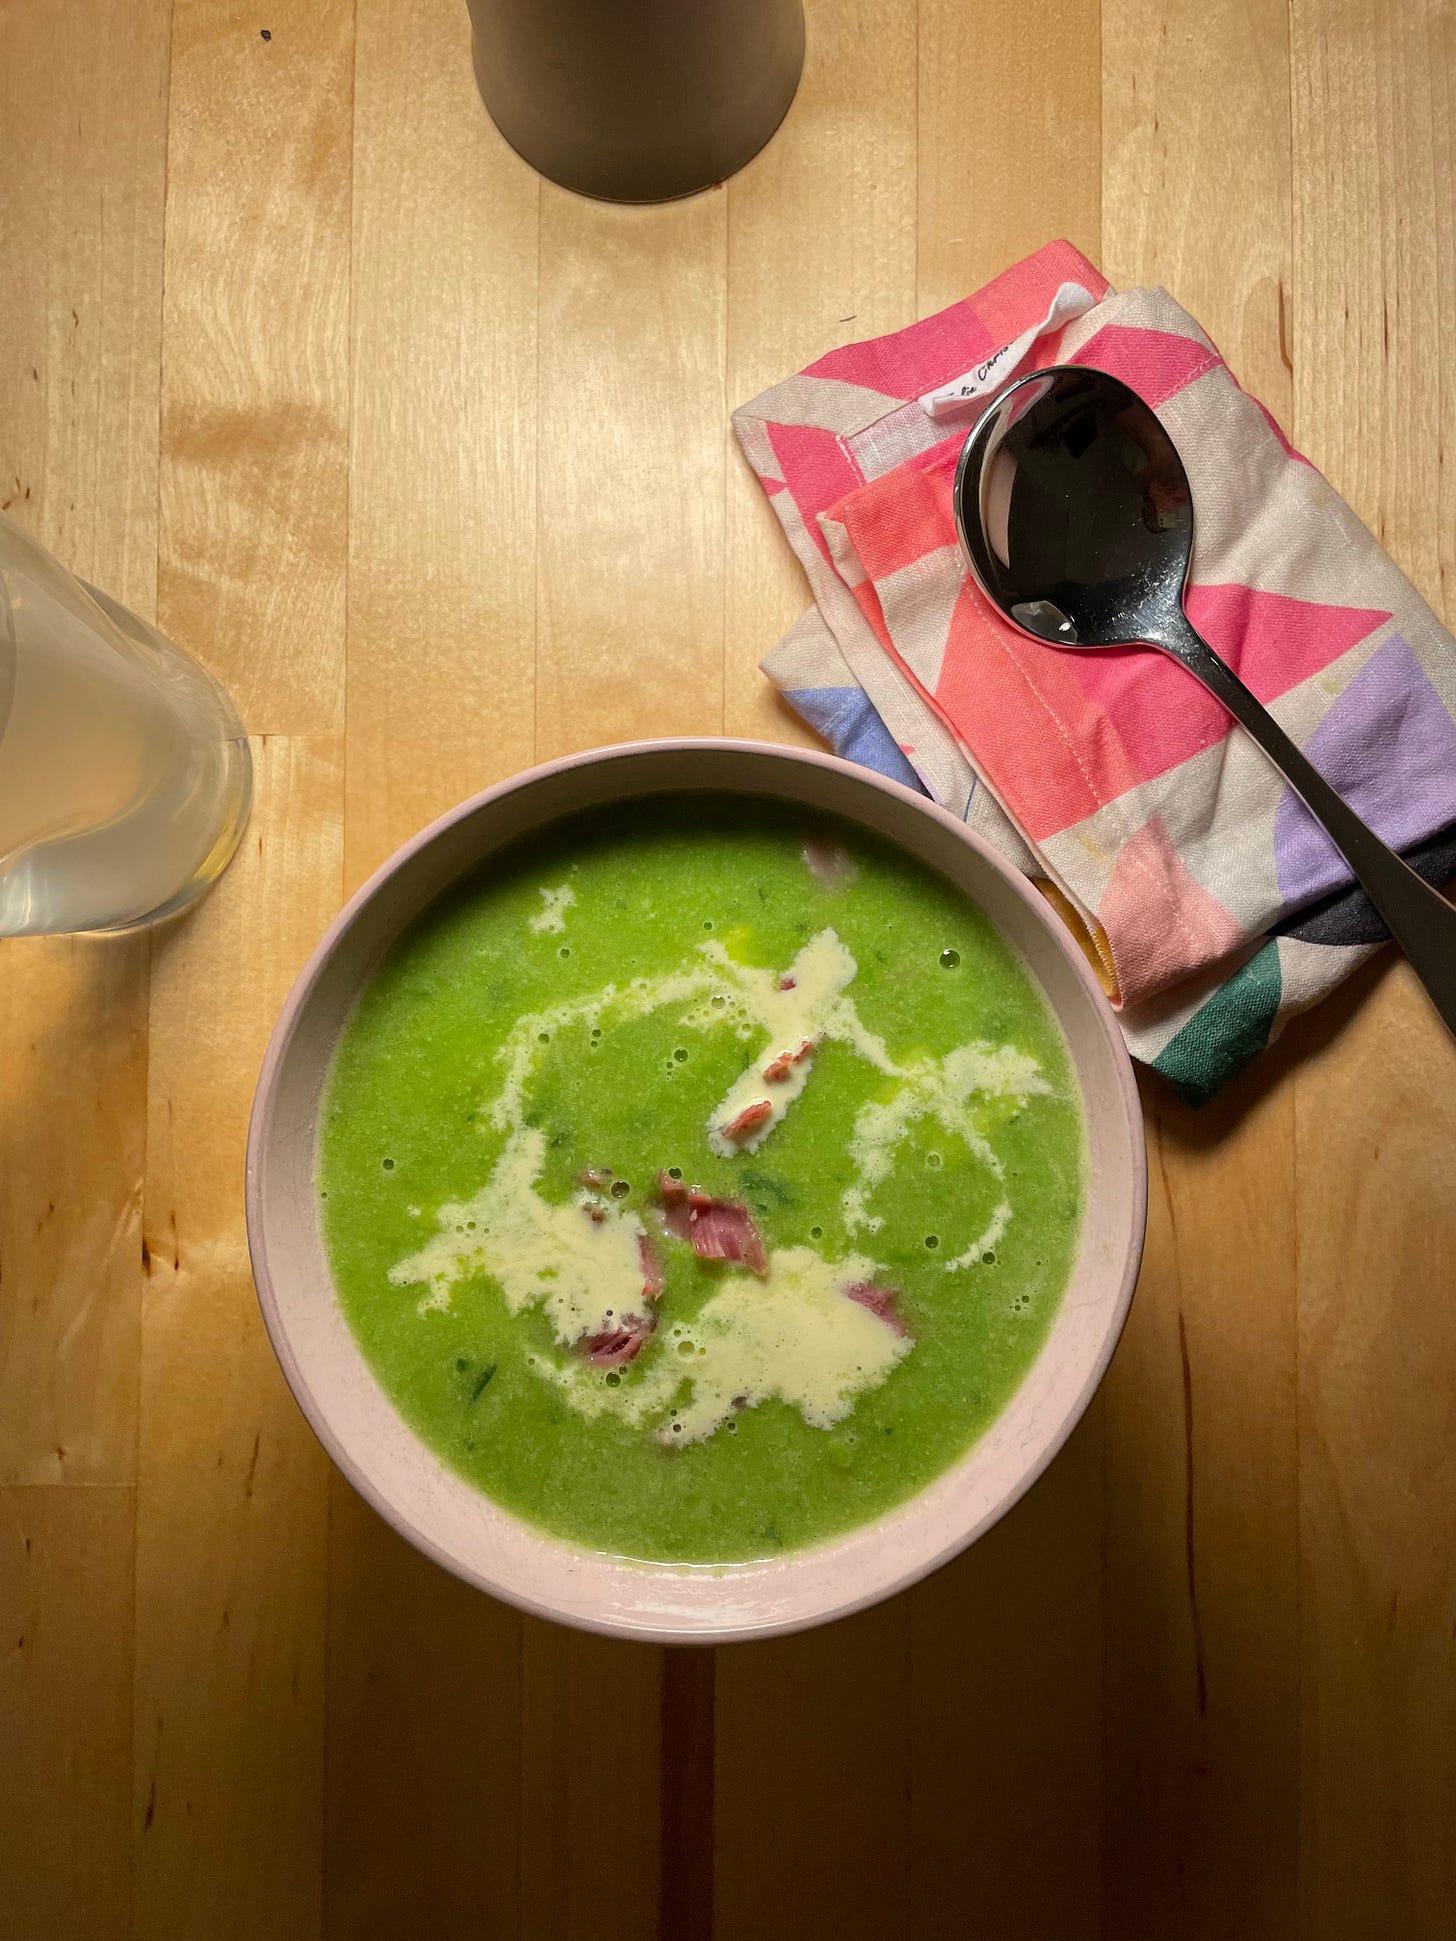 Pink bowl featuring bright green pea and ham hock soup, made with frozen peas. Chunks of ham hock are in the bowl and it's finished with a drizzle of cream. A patterned napkin and glass of coconut water are nearby. The table is lit by a small mushroom lamp.